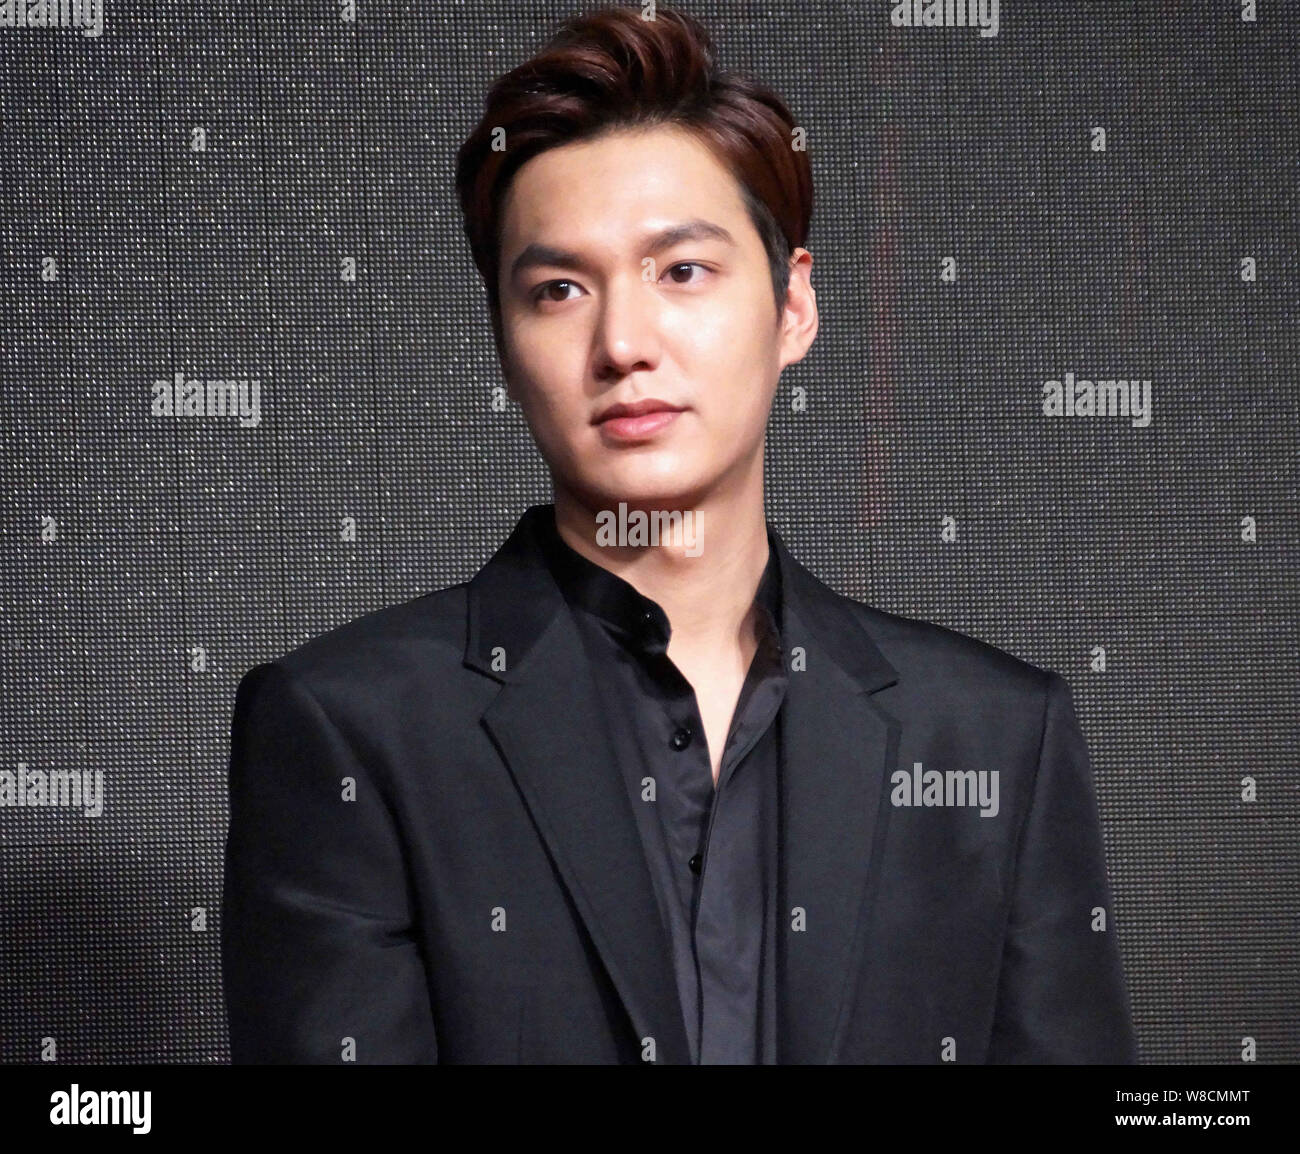 South Korean actor Lee Min-ho poses at a press conference for his movie "Bounty Hunters" during the 18th Shanghai International Film Festival in Shang Stock Photo